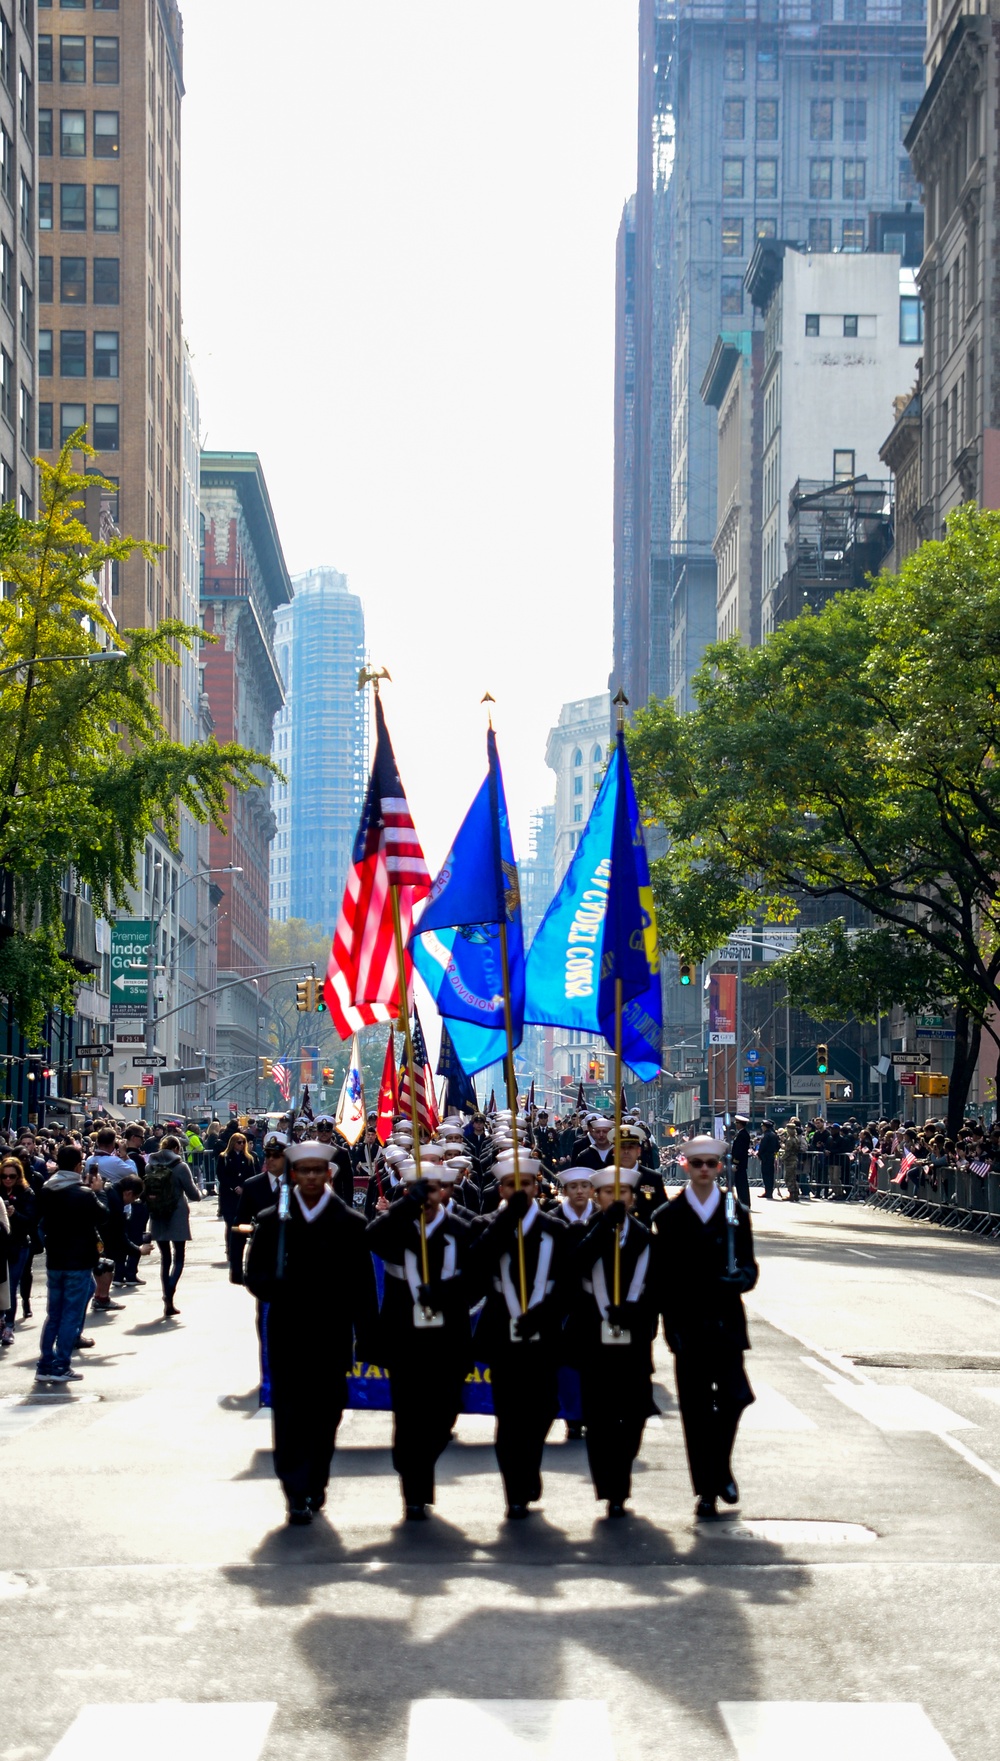 Sailors march in the Veterans Day parade